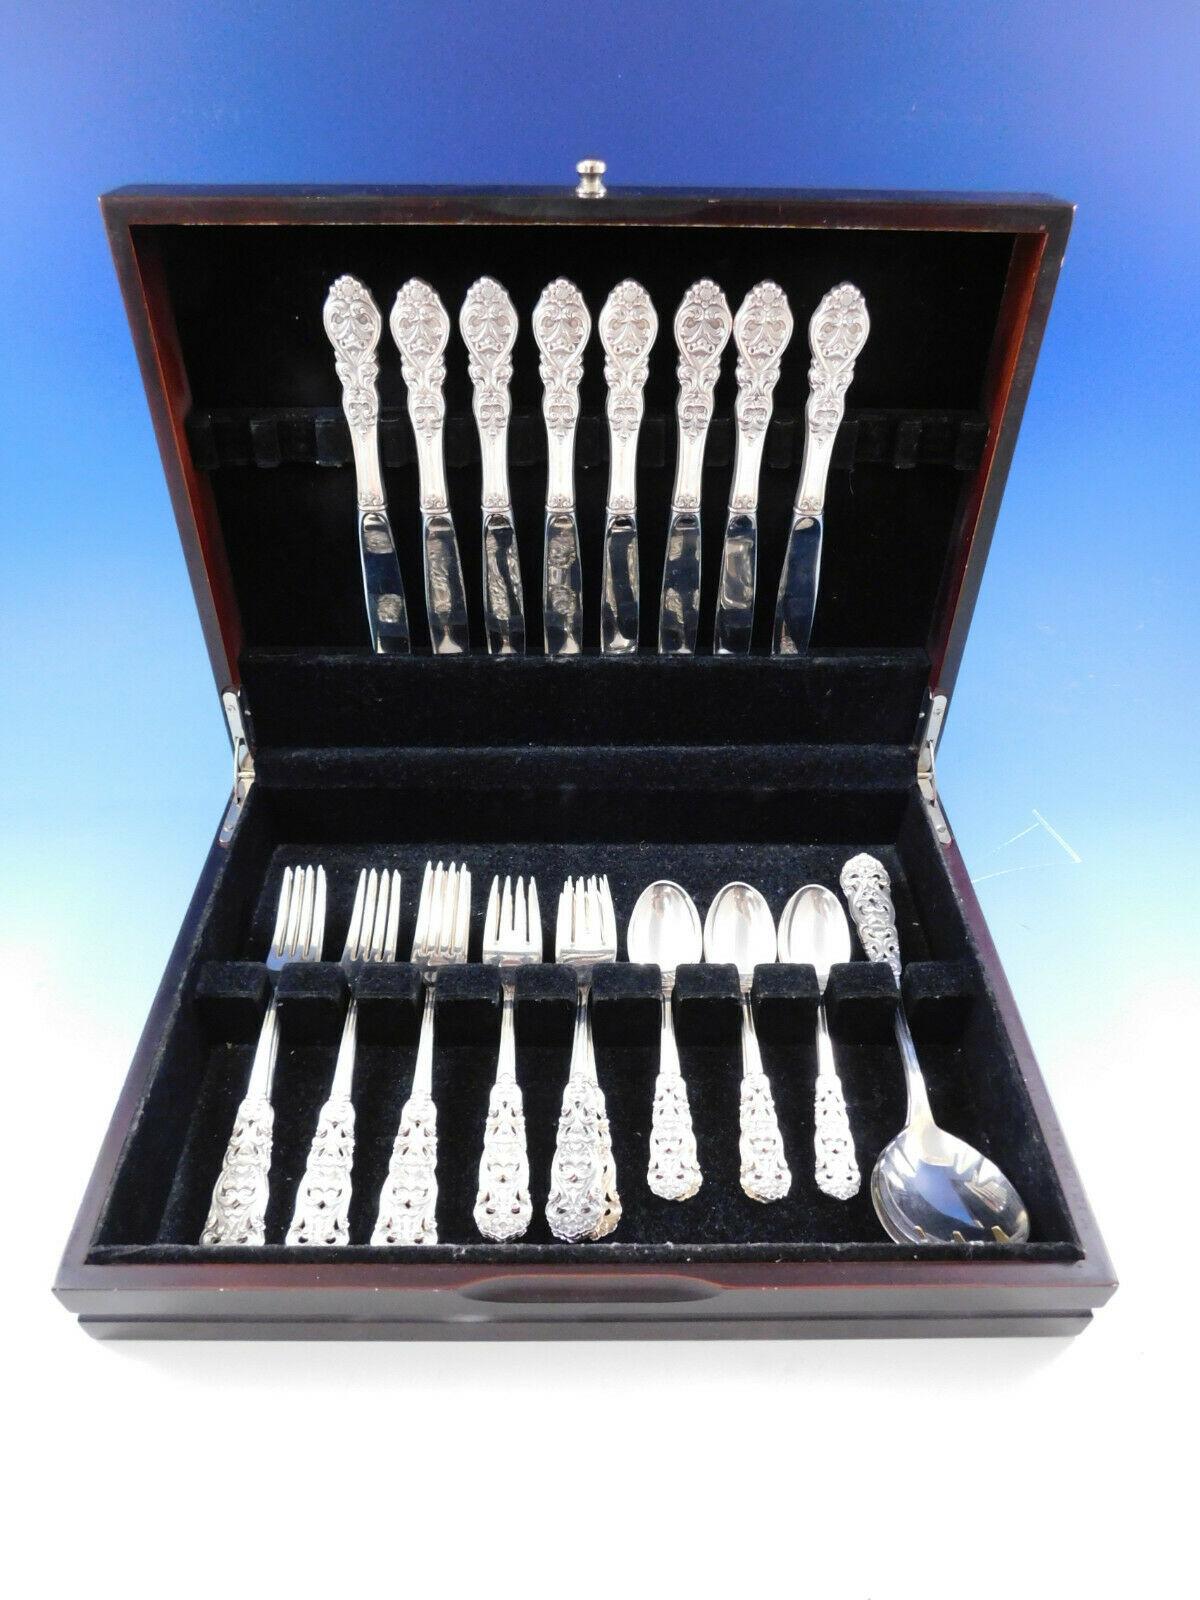 Valdres by Th. Marthinsen (Norway) sterling silver flatware set with ornate pierced handle, 34 pieces. This set includes:

8 dinner knives, 9 1/4